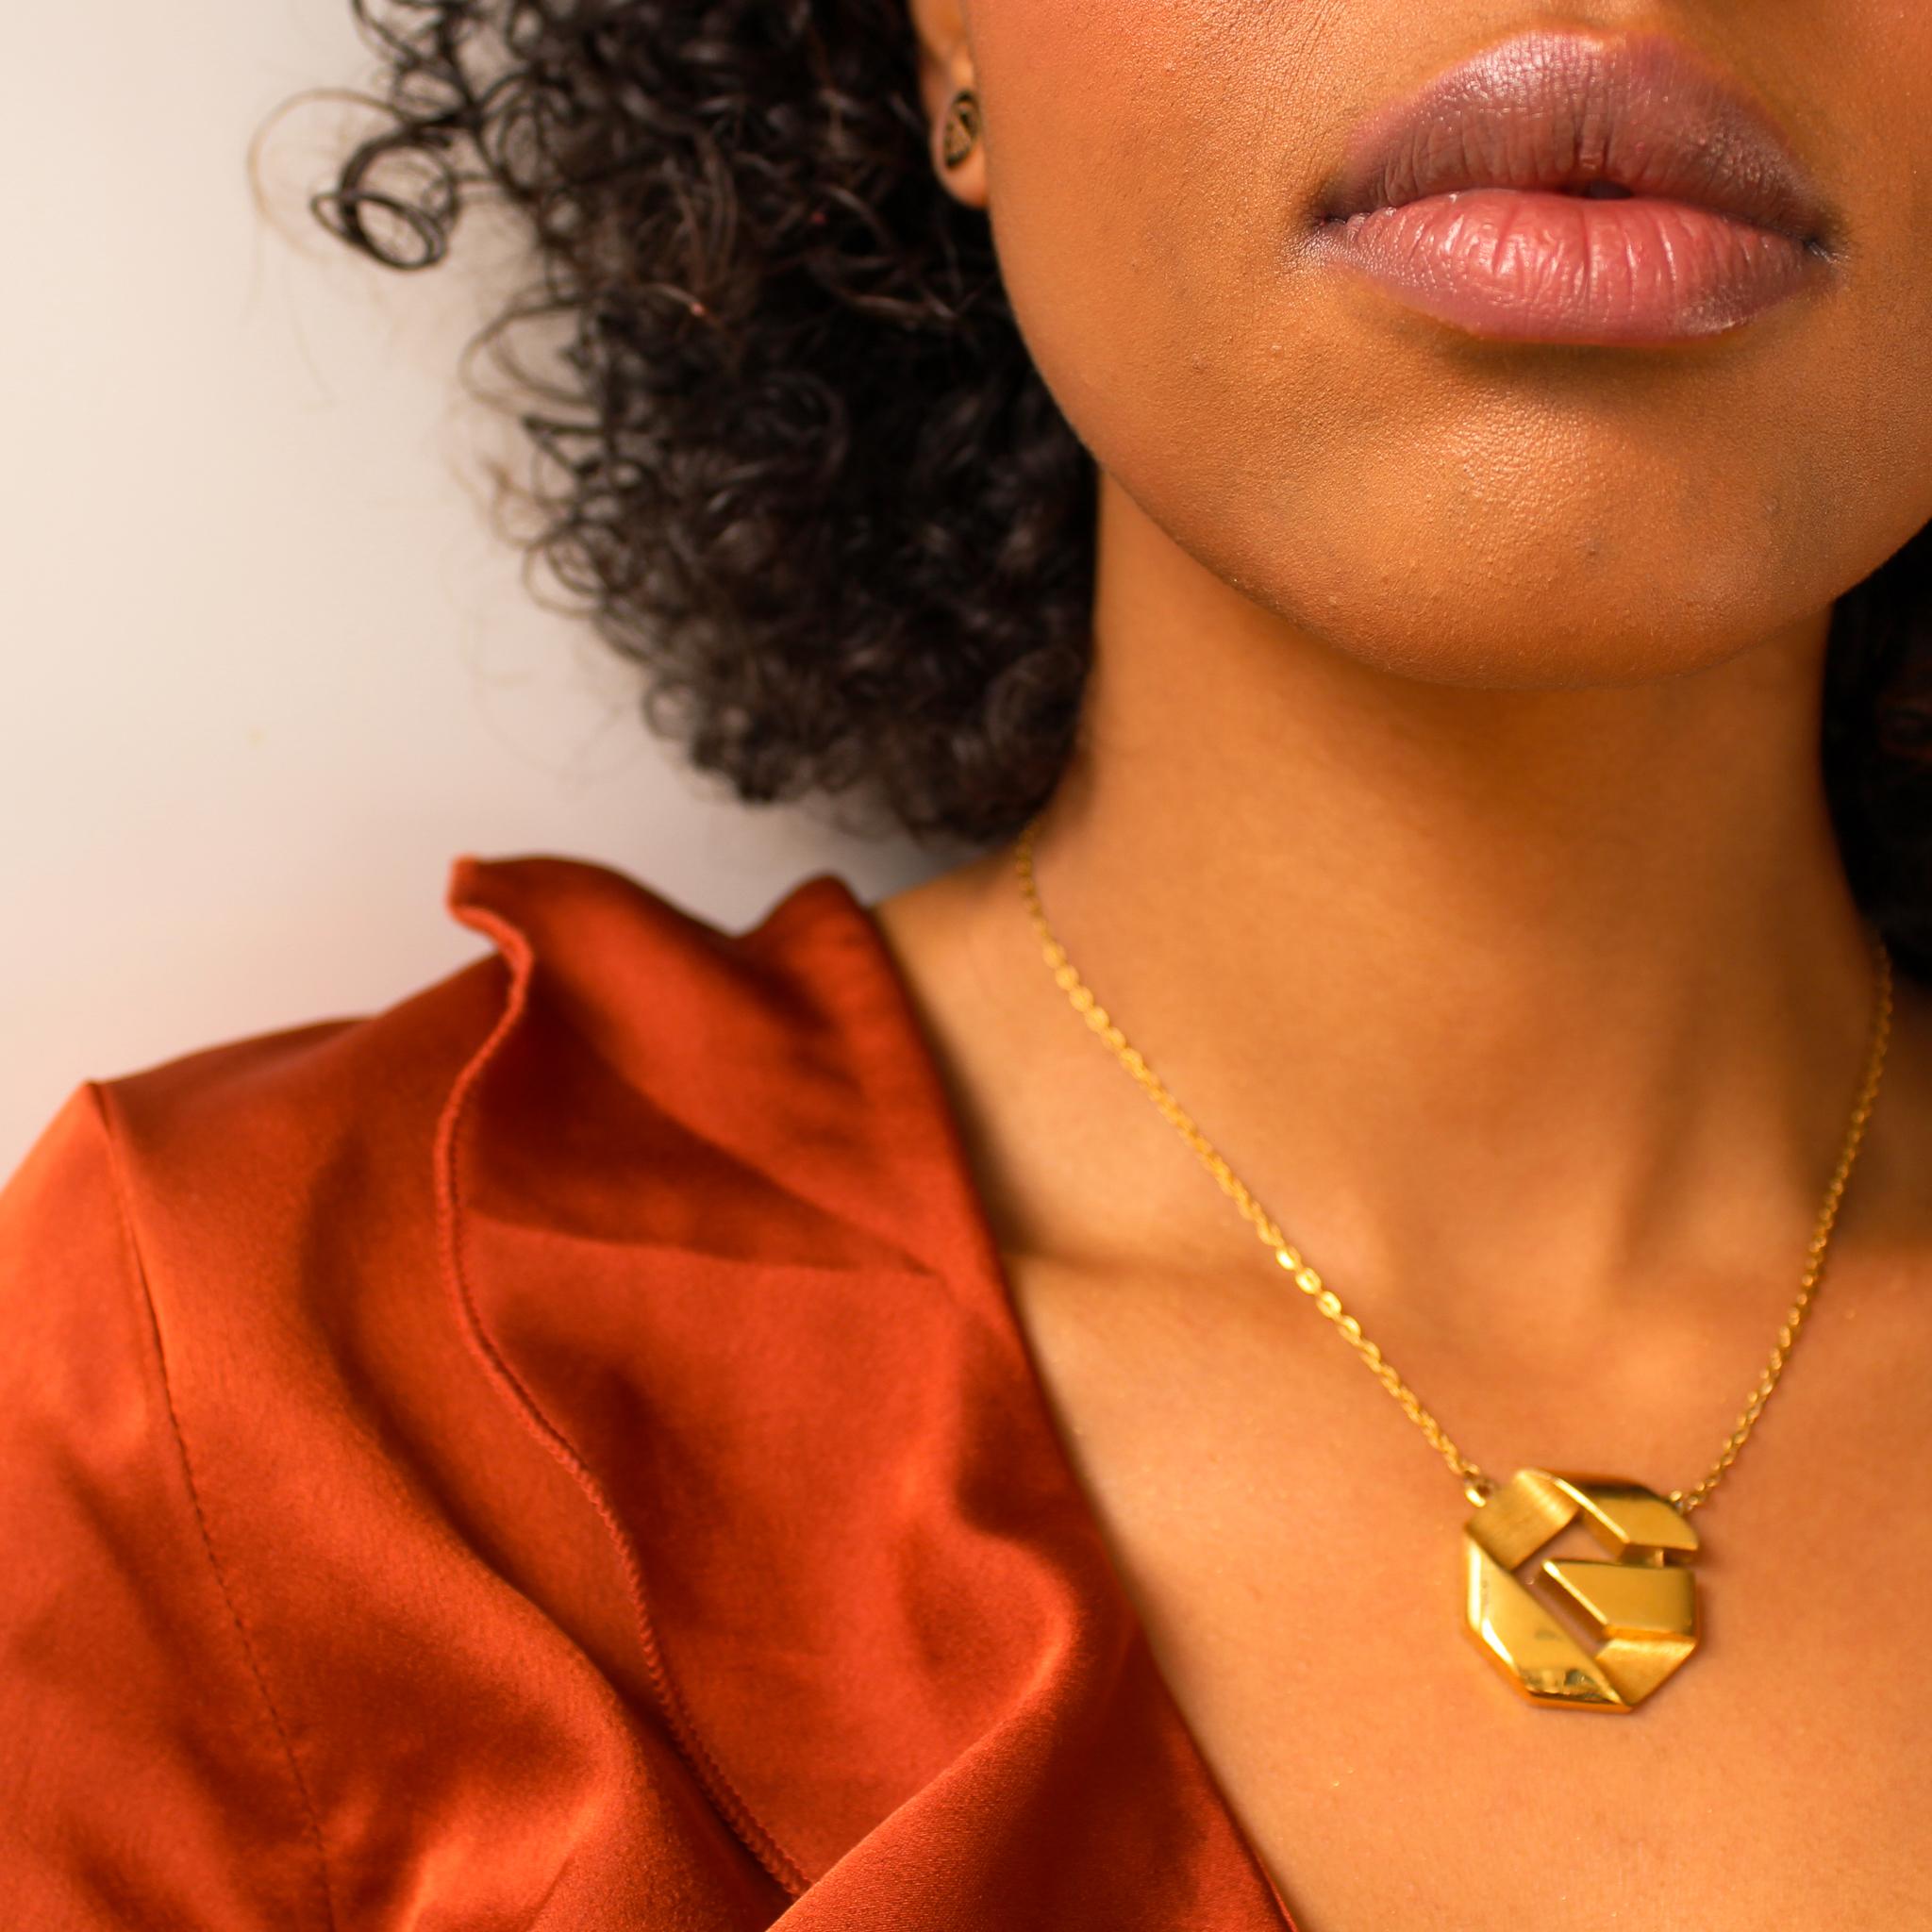 Givenchy Vintage 1970s Pendant Necklace

Super cool geometric pendant from the legendary house of Hubert de Givenchy. Made in France in 1977 from gold plated metal, featuring a G for Givenchy pendant on a fine chain. 

Size & Fit
-Length - 15